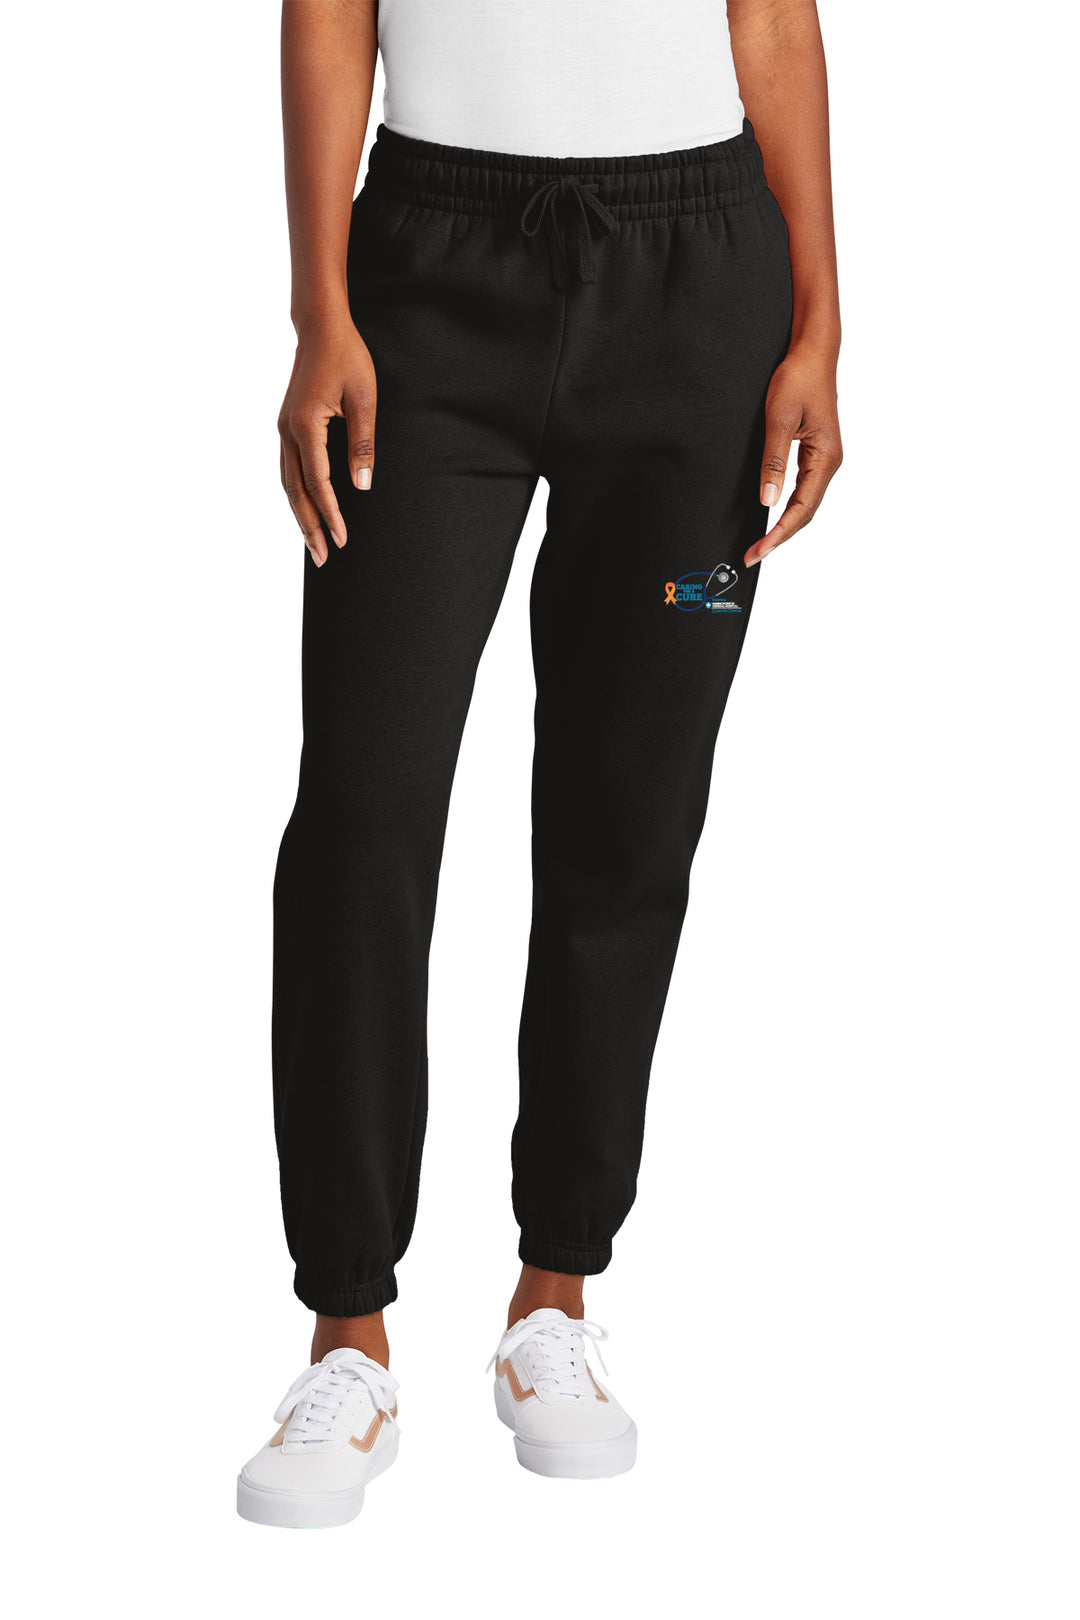 Caring for a Cure Womens V.I.T Fleece Sweatpant (DT6110)